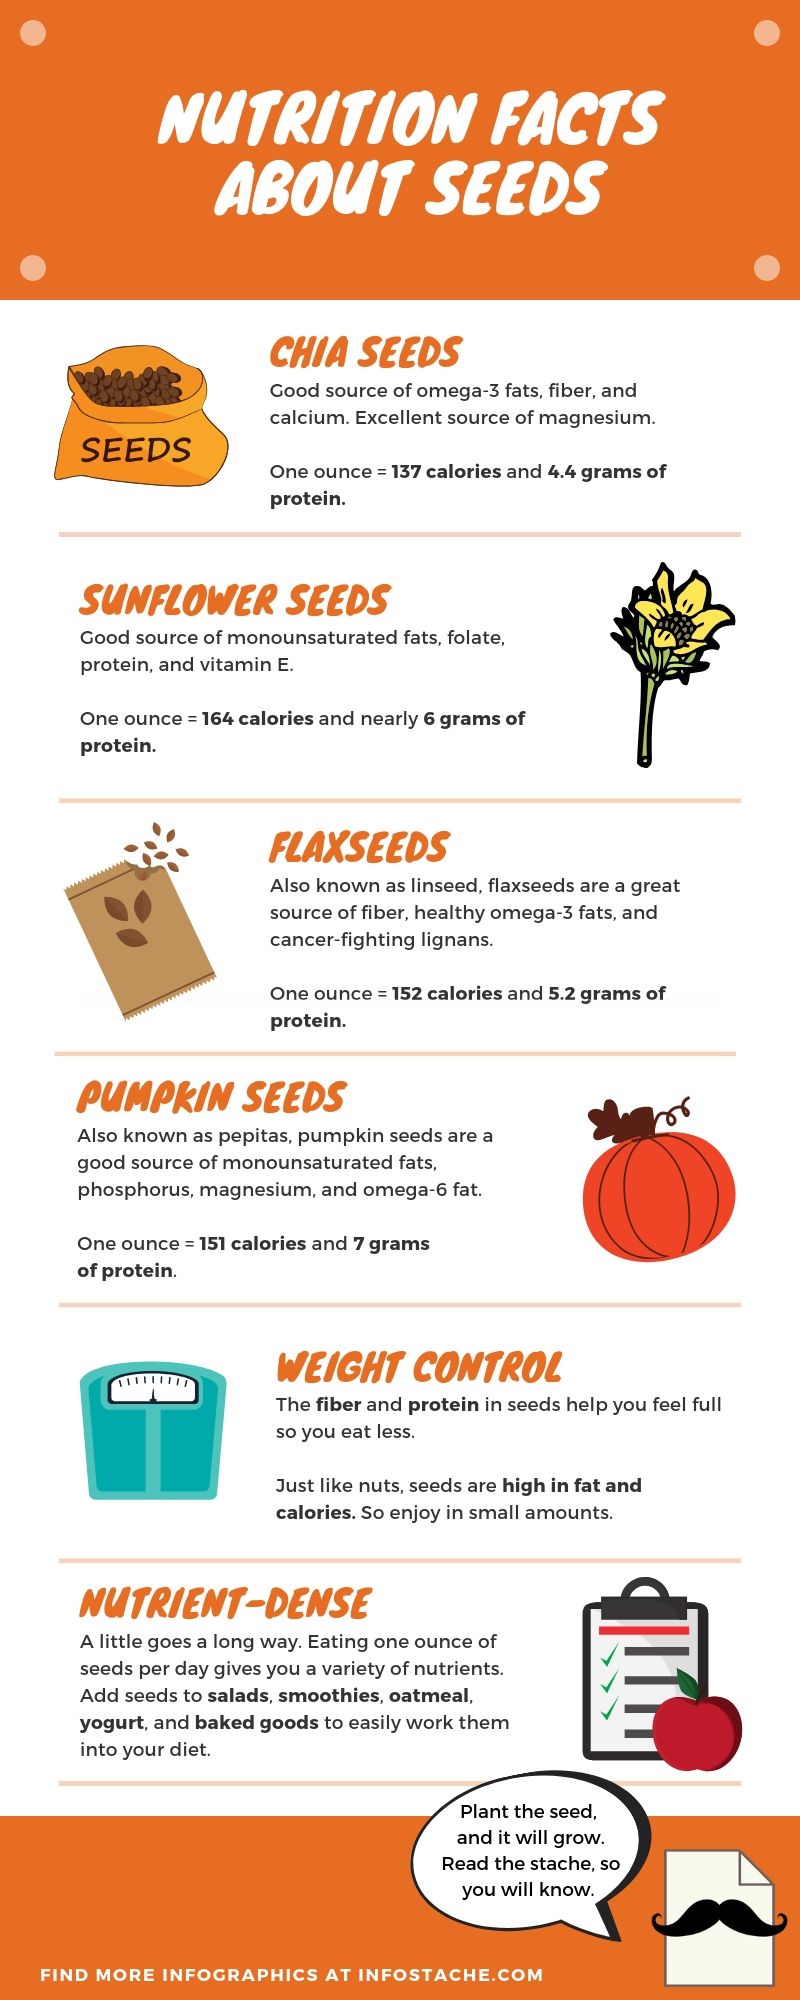 Nutrition Facts About Seeds